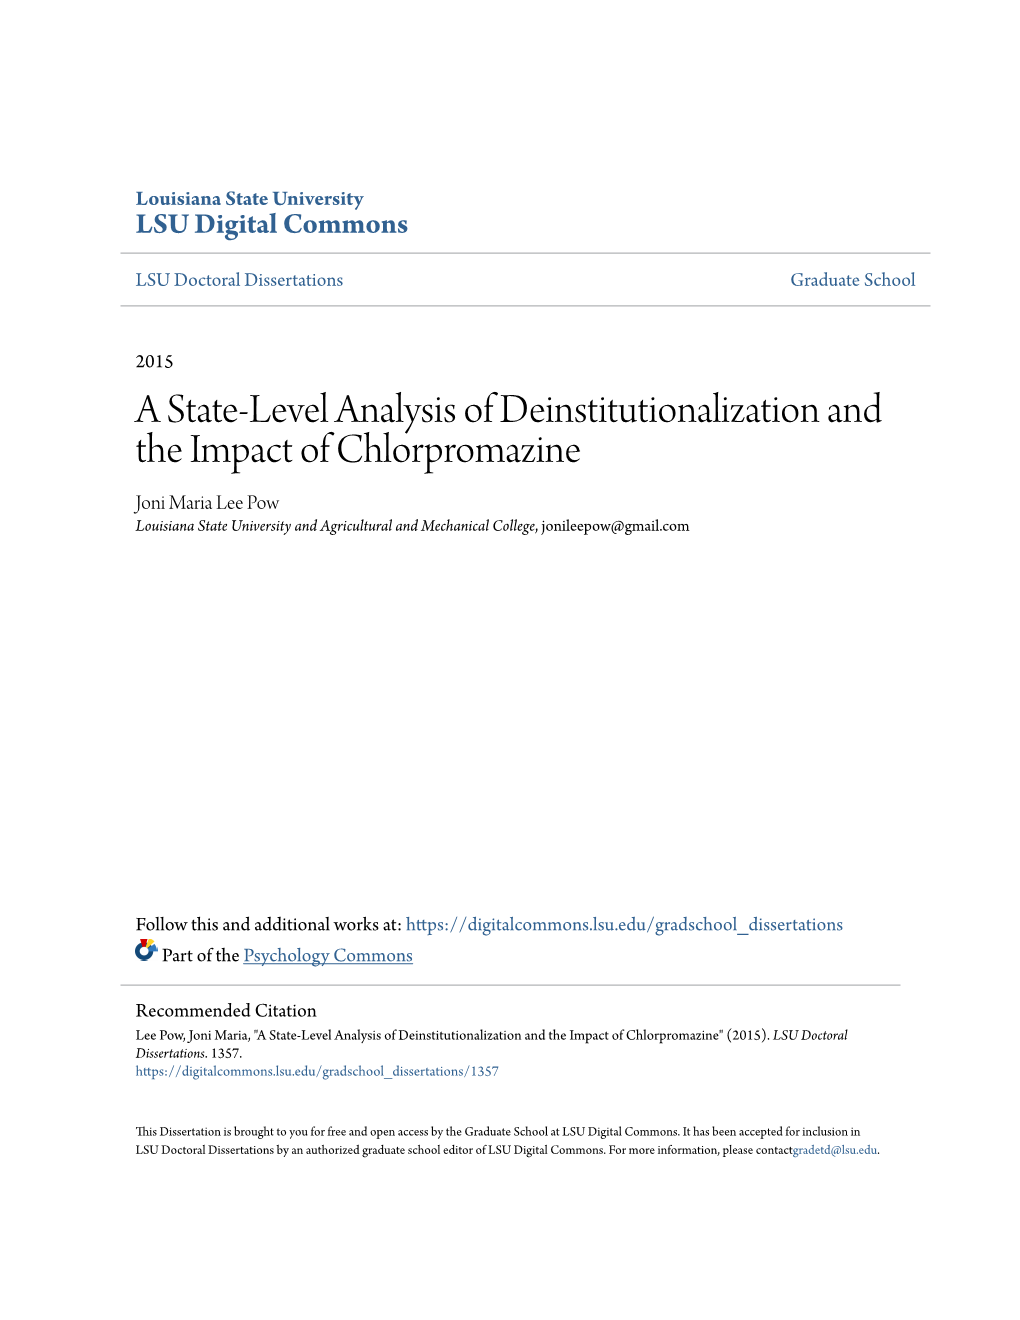 A State-Level Analysis of Deinstitutionalization and the Impact of Chlorpromazine